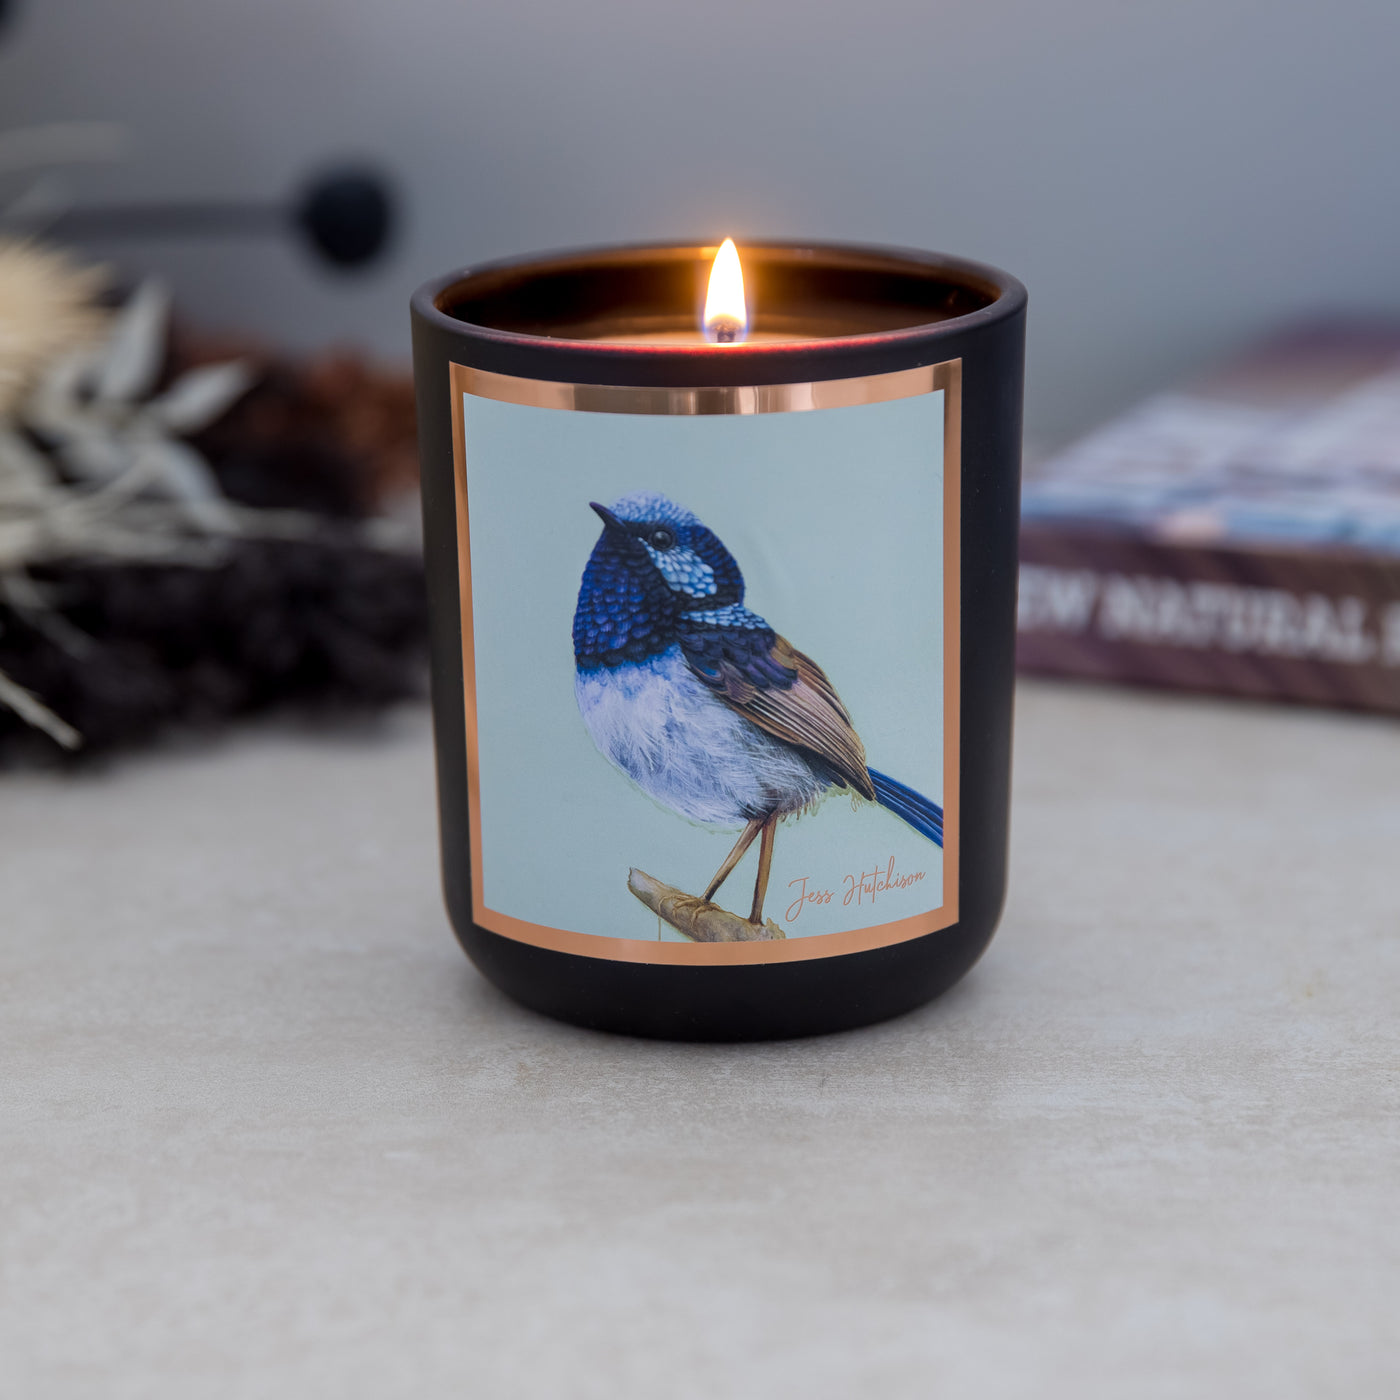 emon Myrtle scented soy candle collab with Australian artist Jess Hutchison gift box hand poured Barossa Adelaide South Australia available for stockists wholesale